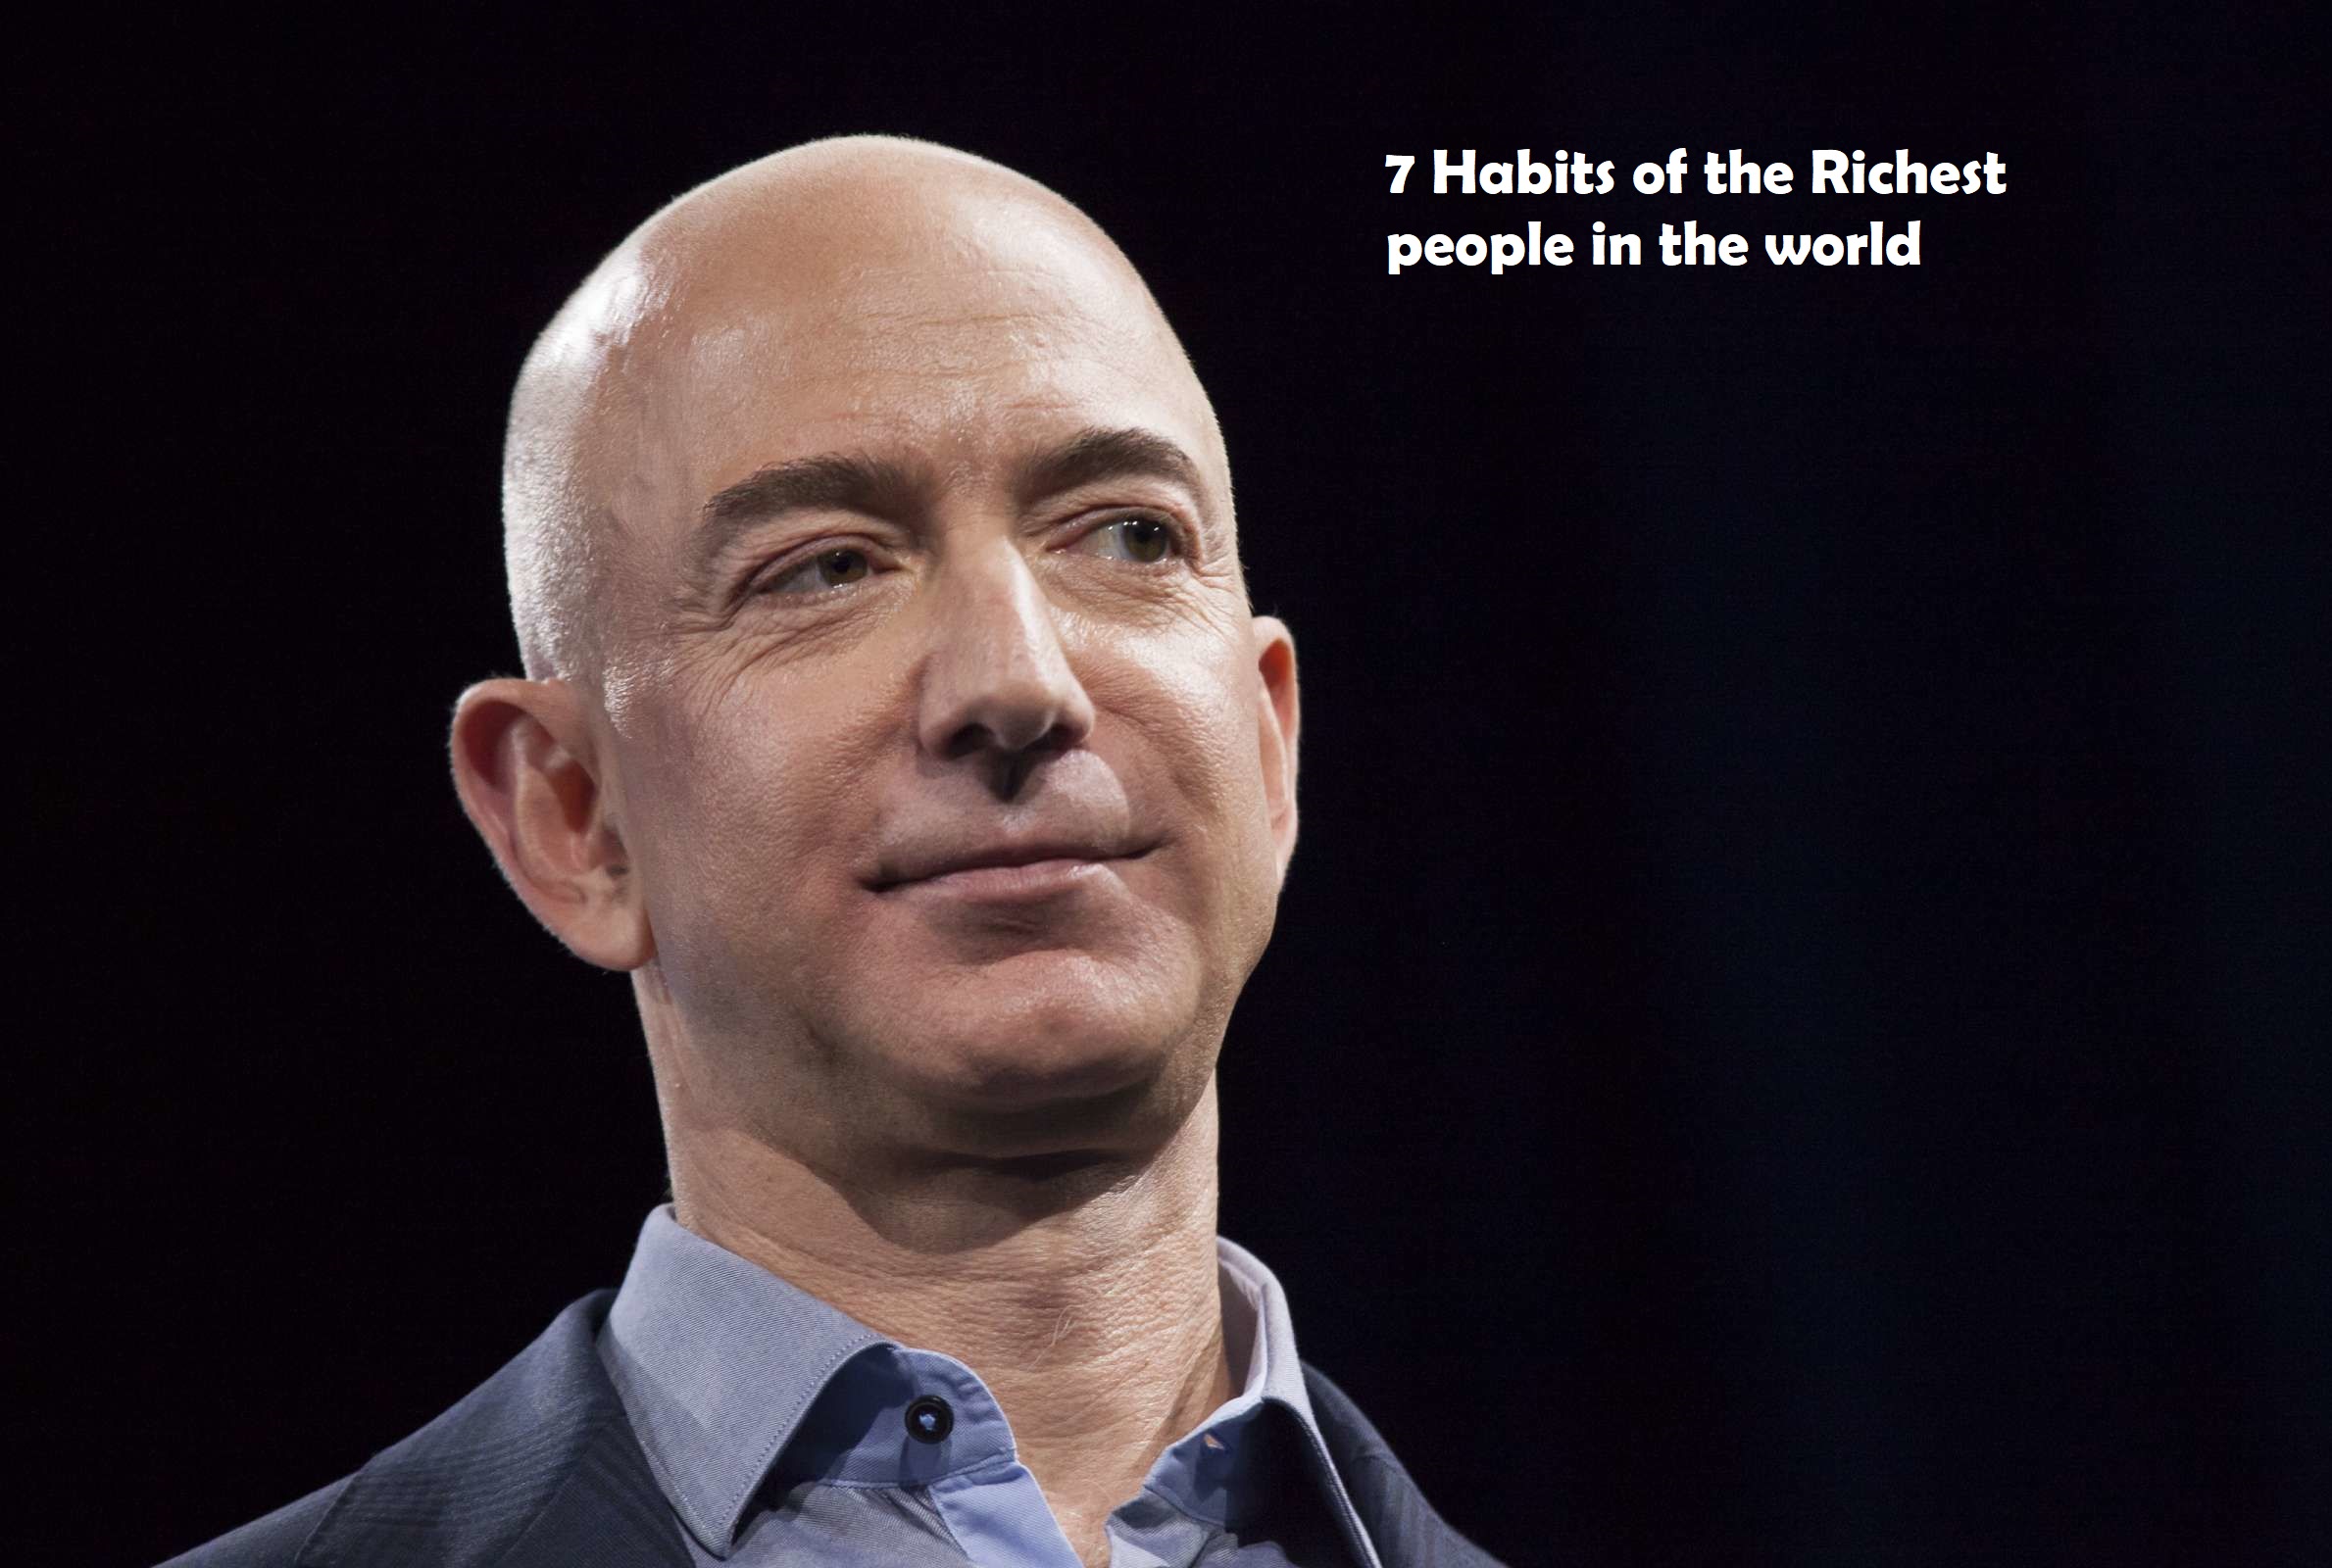 7 Habits of the Richest people in the world